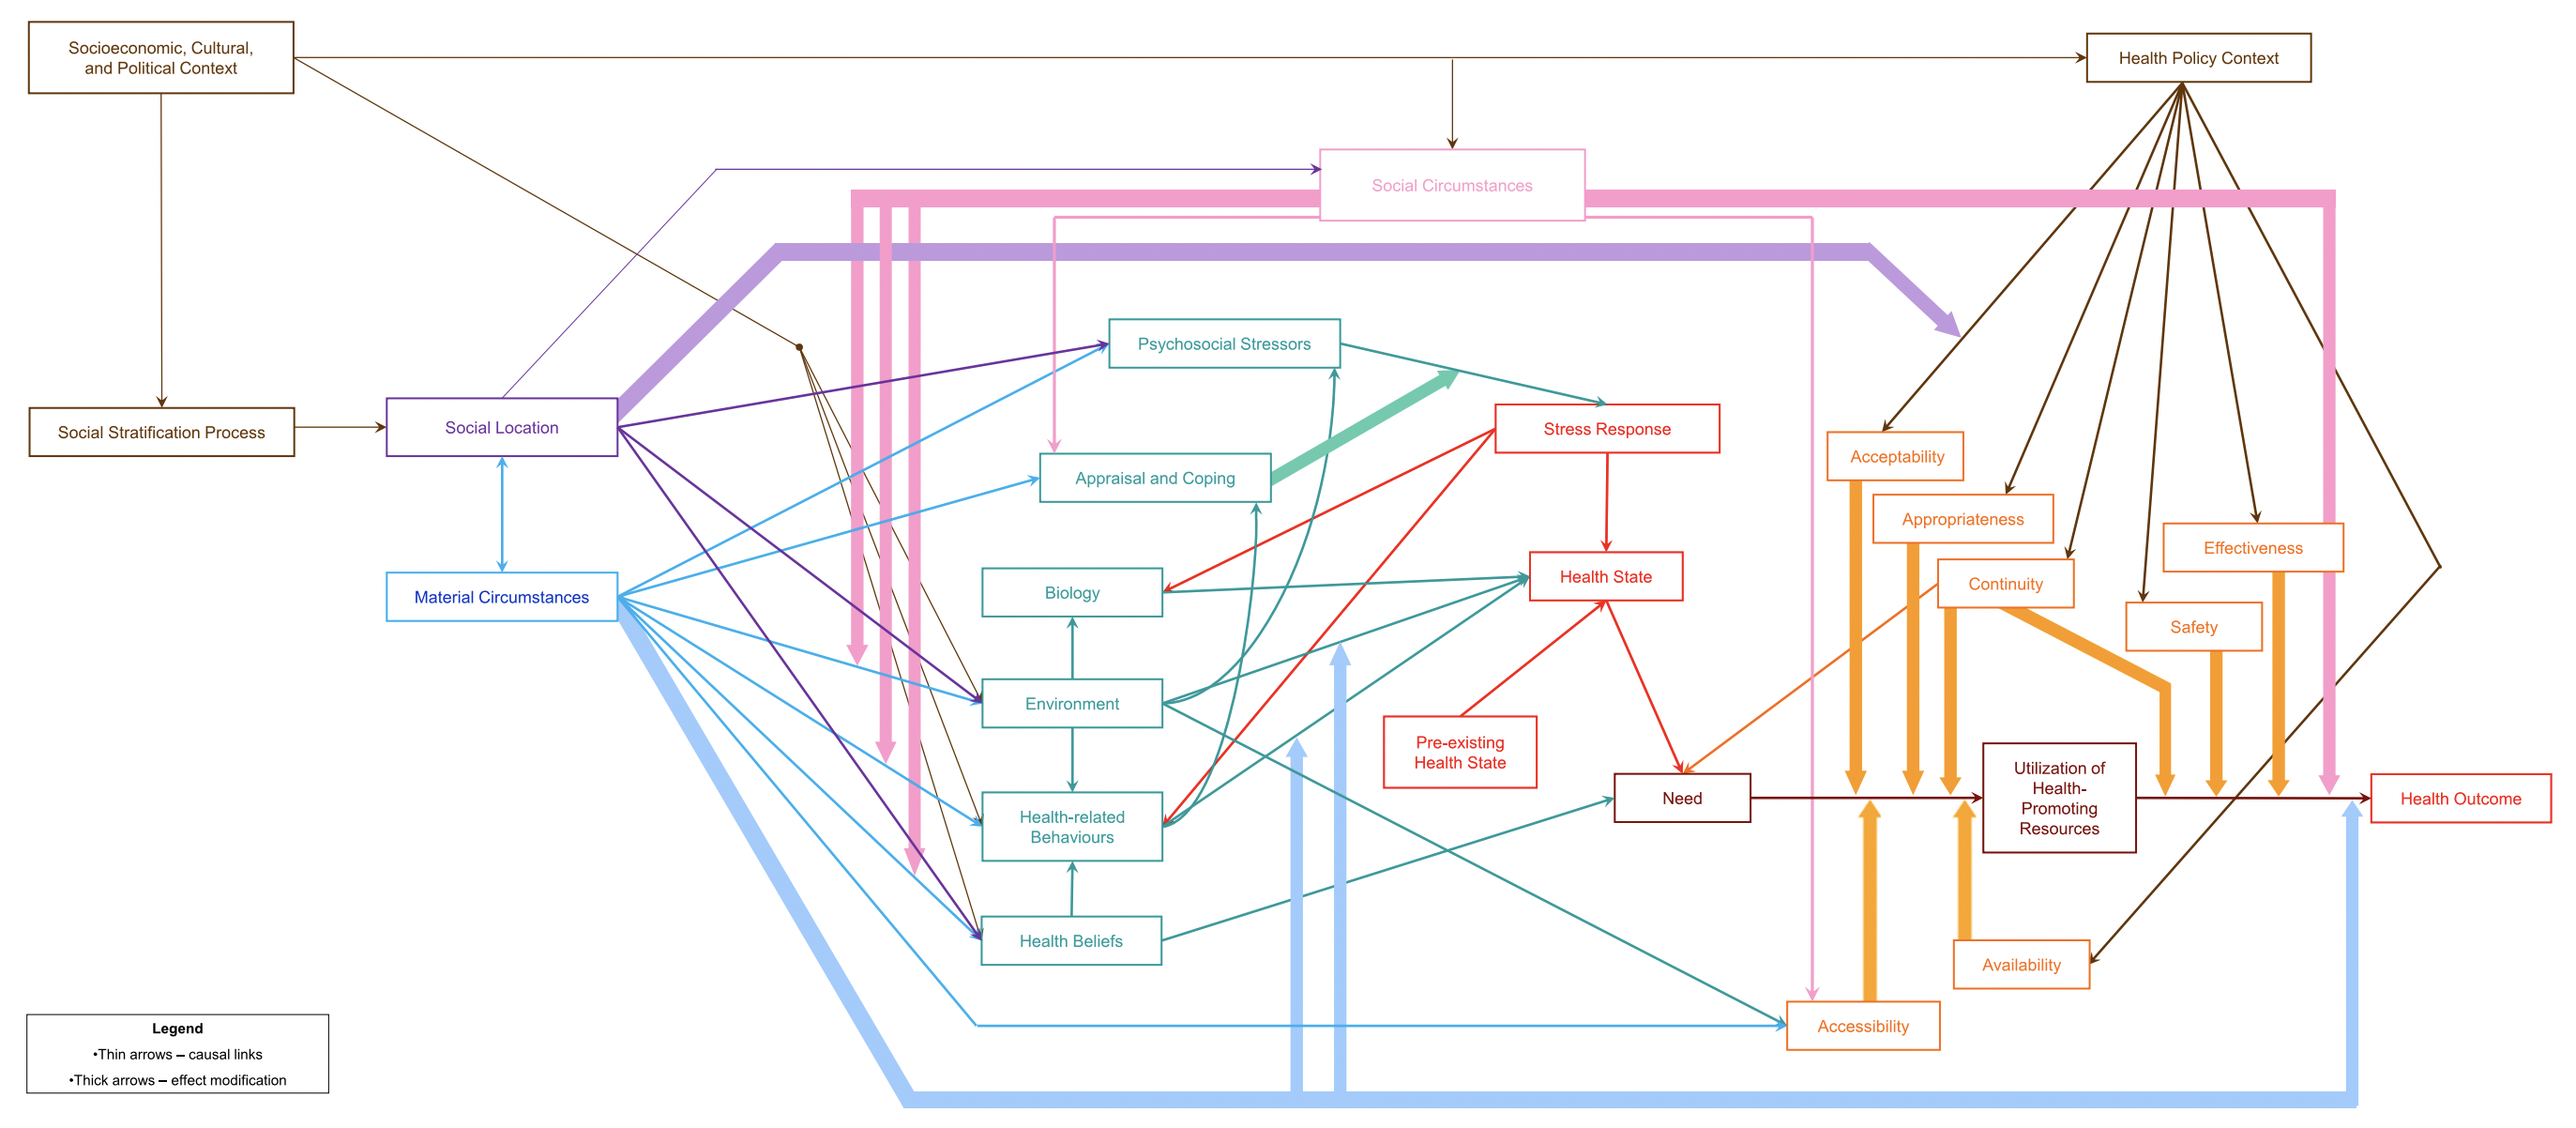 A diagram showing labelled rectangular boxes ordered from left to right in an interconnected chain linking a person’s Social Location, for example, race, gender, education, religion (using purple lines) and Material Circumstances, for example, income, food, housing security (using blue lines), to health outcomes (e.g. life expectancy). In the middle are multiple rectangles connected along these pathways to show relationships between the environments we live, the ways we think and behave, and the levels of stress on our bodies and minds; the levels of need for support services, characteristics of services made available, and how we access and benefit from those services. Furthest left and from the top, a rectangle for “Political, Social and Economic Context,” “Health Policy Contexts” is connected down to a rectangle labeled “Social Stratification Process” which connects to and thus is said to impact a person's Social Location and Social Circumstances.